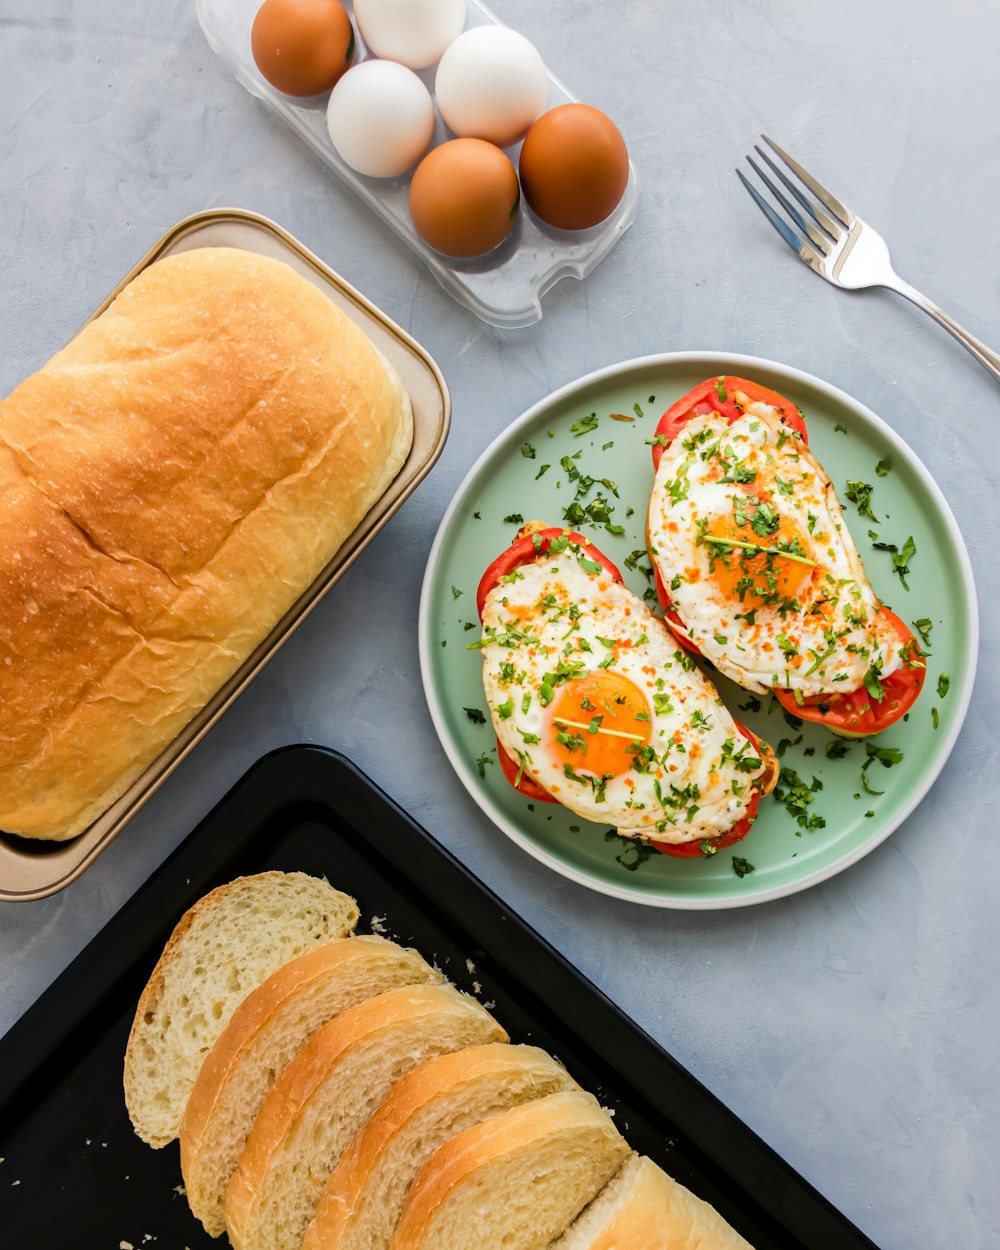 a plate of eggs and a loaf of bread on a table